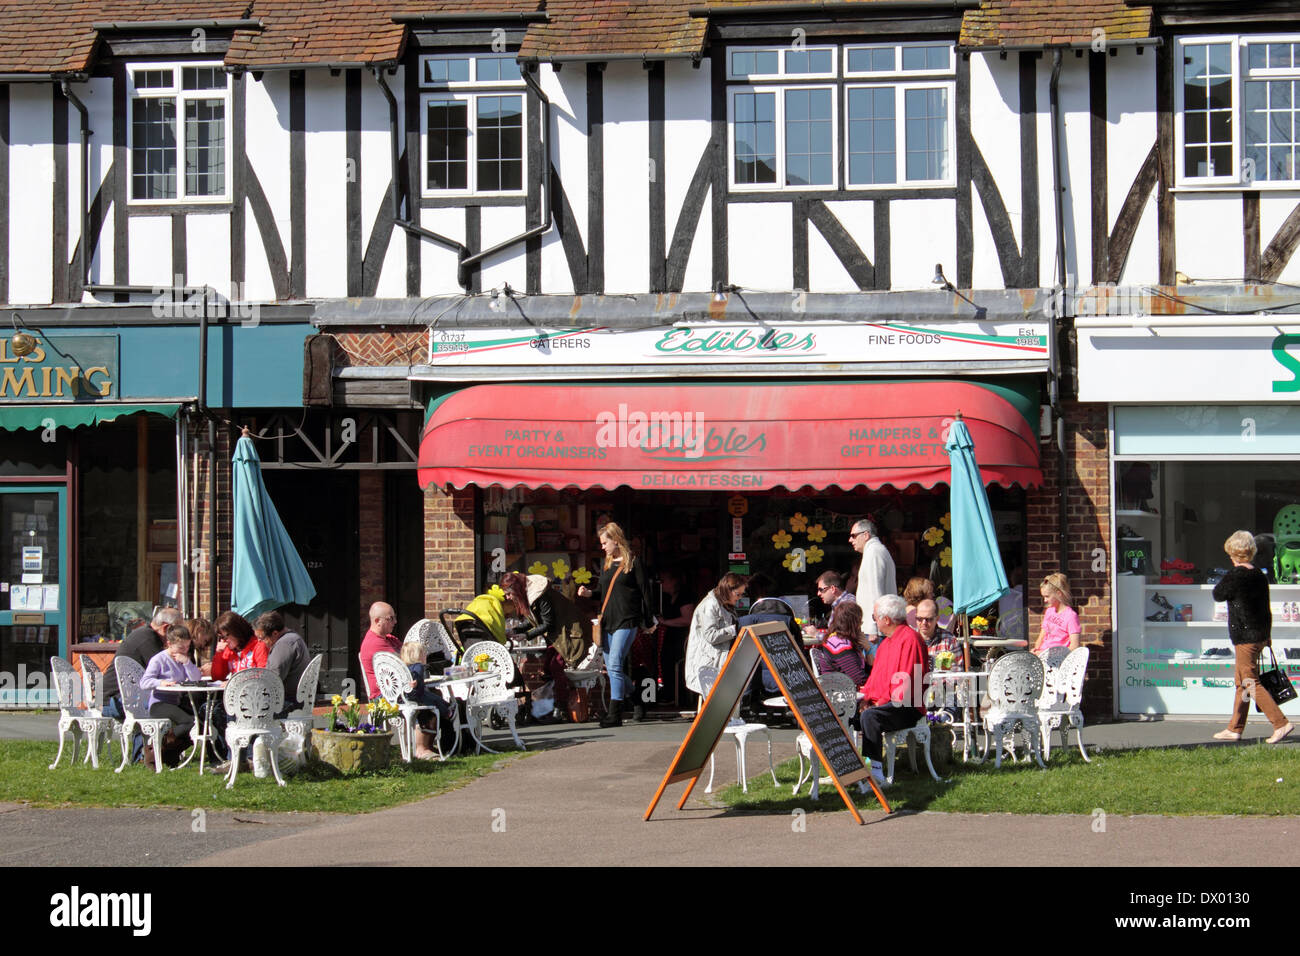 Shops and Edibles Delicatessen cafe on the High Street Banstead, Surrey, England. Stock Photo